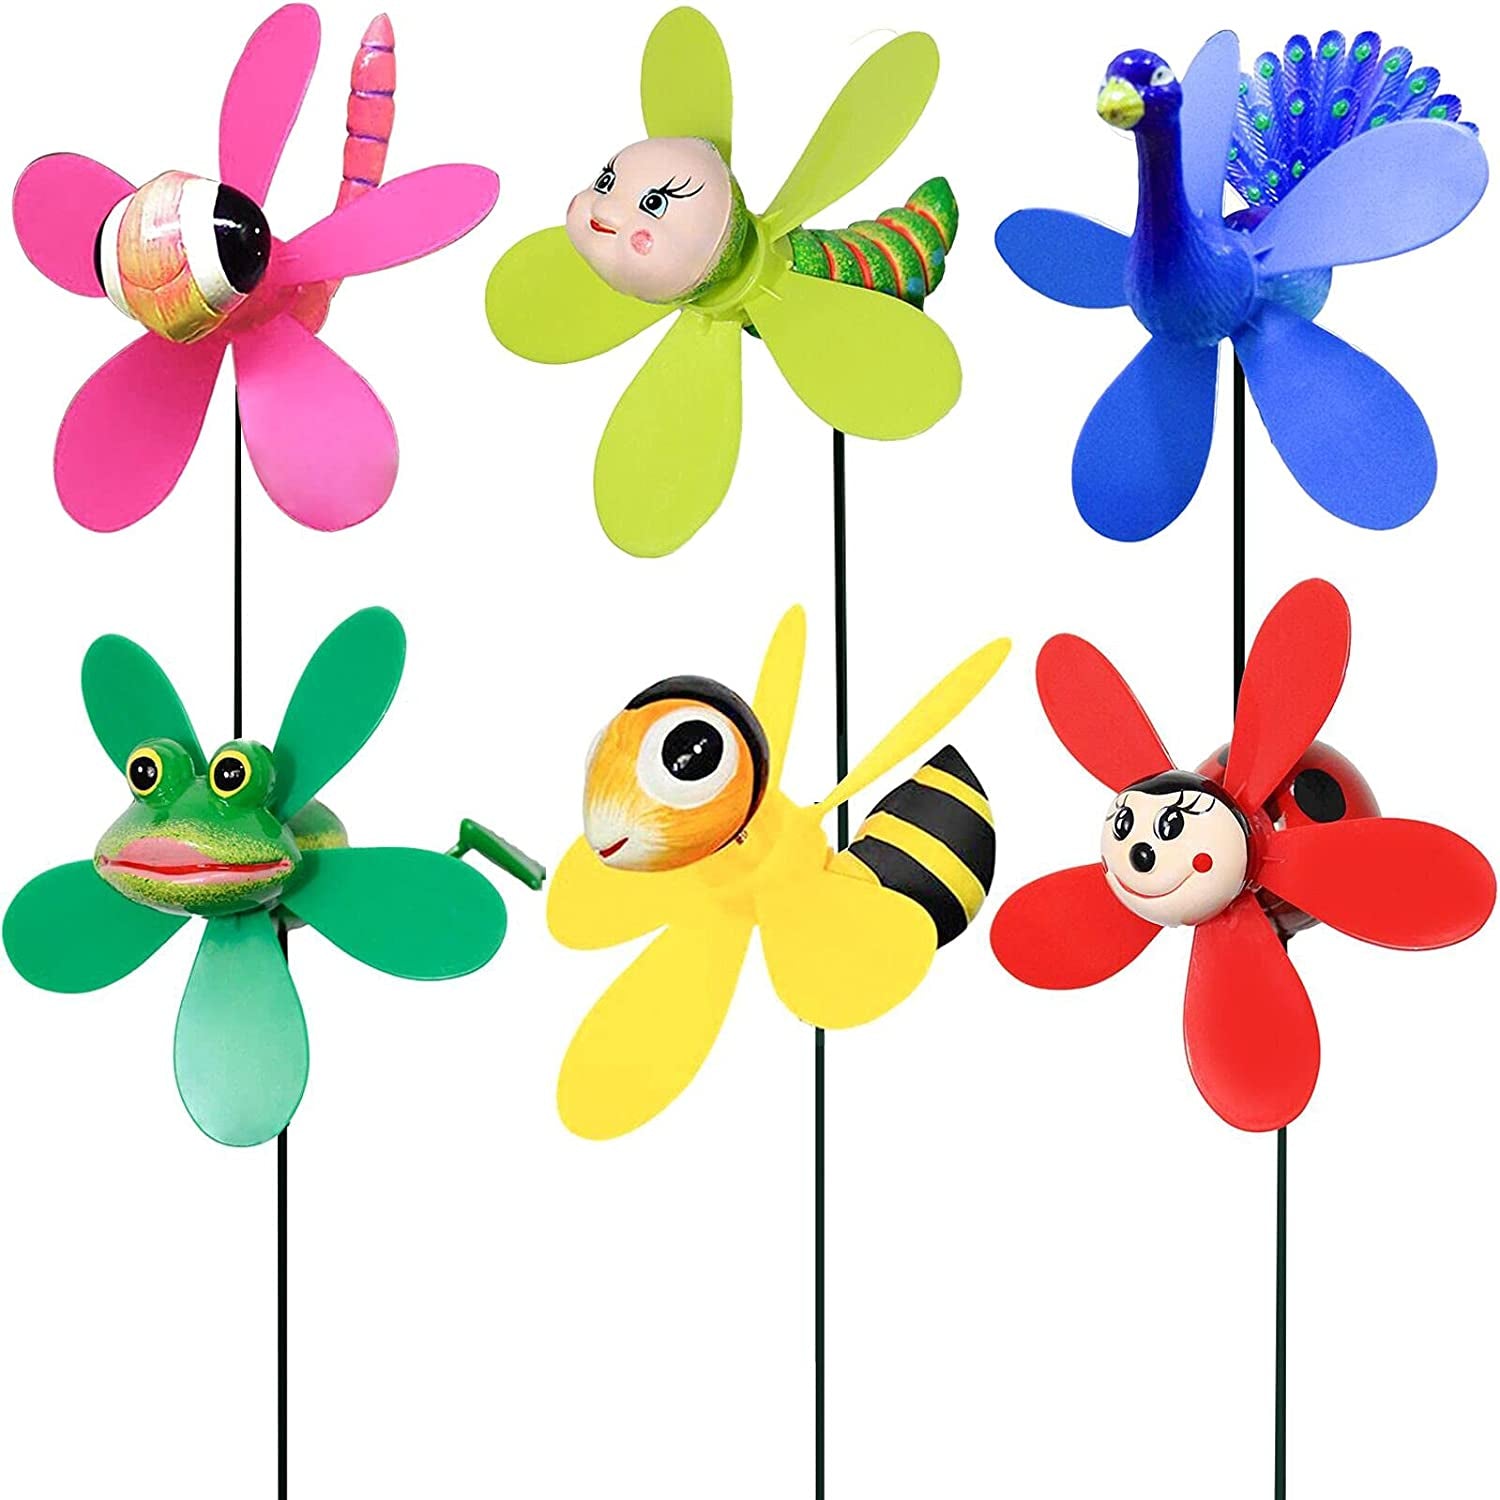 Allinus, Garden Pinwheels, 6 Pack Wind Spinners with Metal Stakes, Colorful Decor Pinwheels Windmills Whirligigs Kids Toys for Outdoor Indoor Garden Yard Lawn Patio Party Wedding Decorations